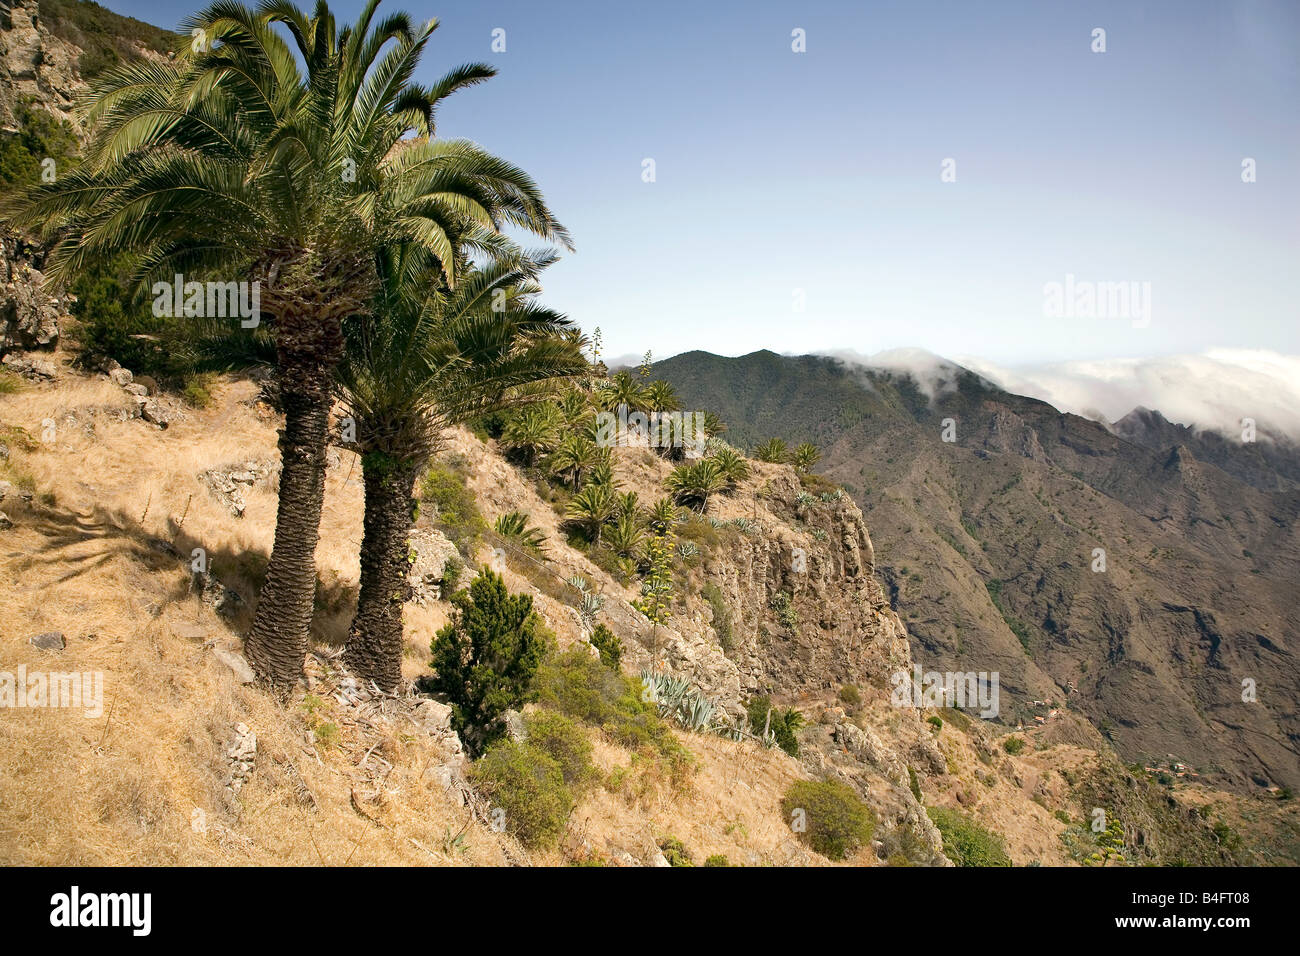 La Gomera La Gomera is situated very close to Tenerife and is one of the Canary Islands governed by Spain Stock Photo